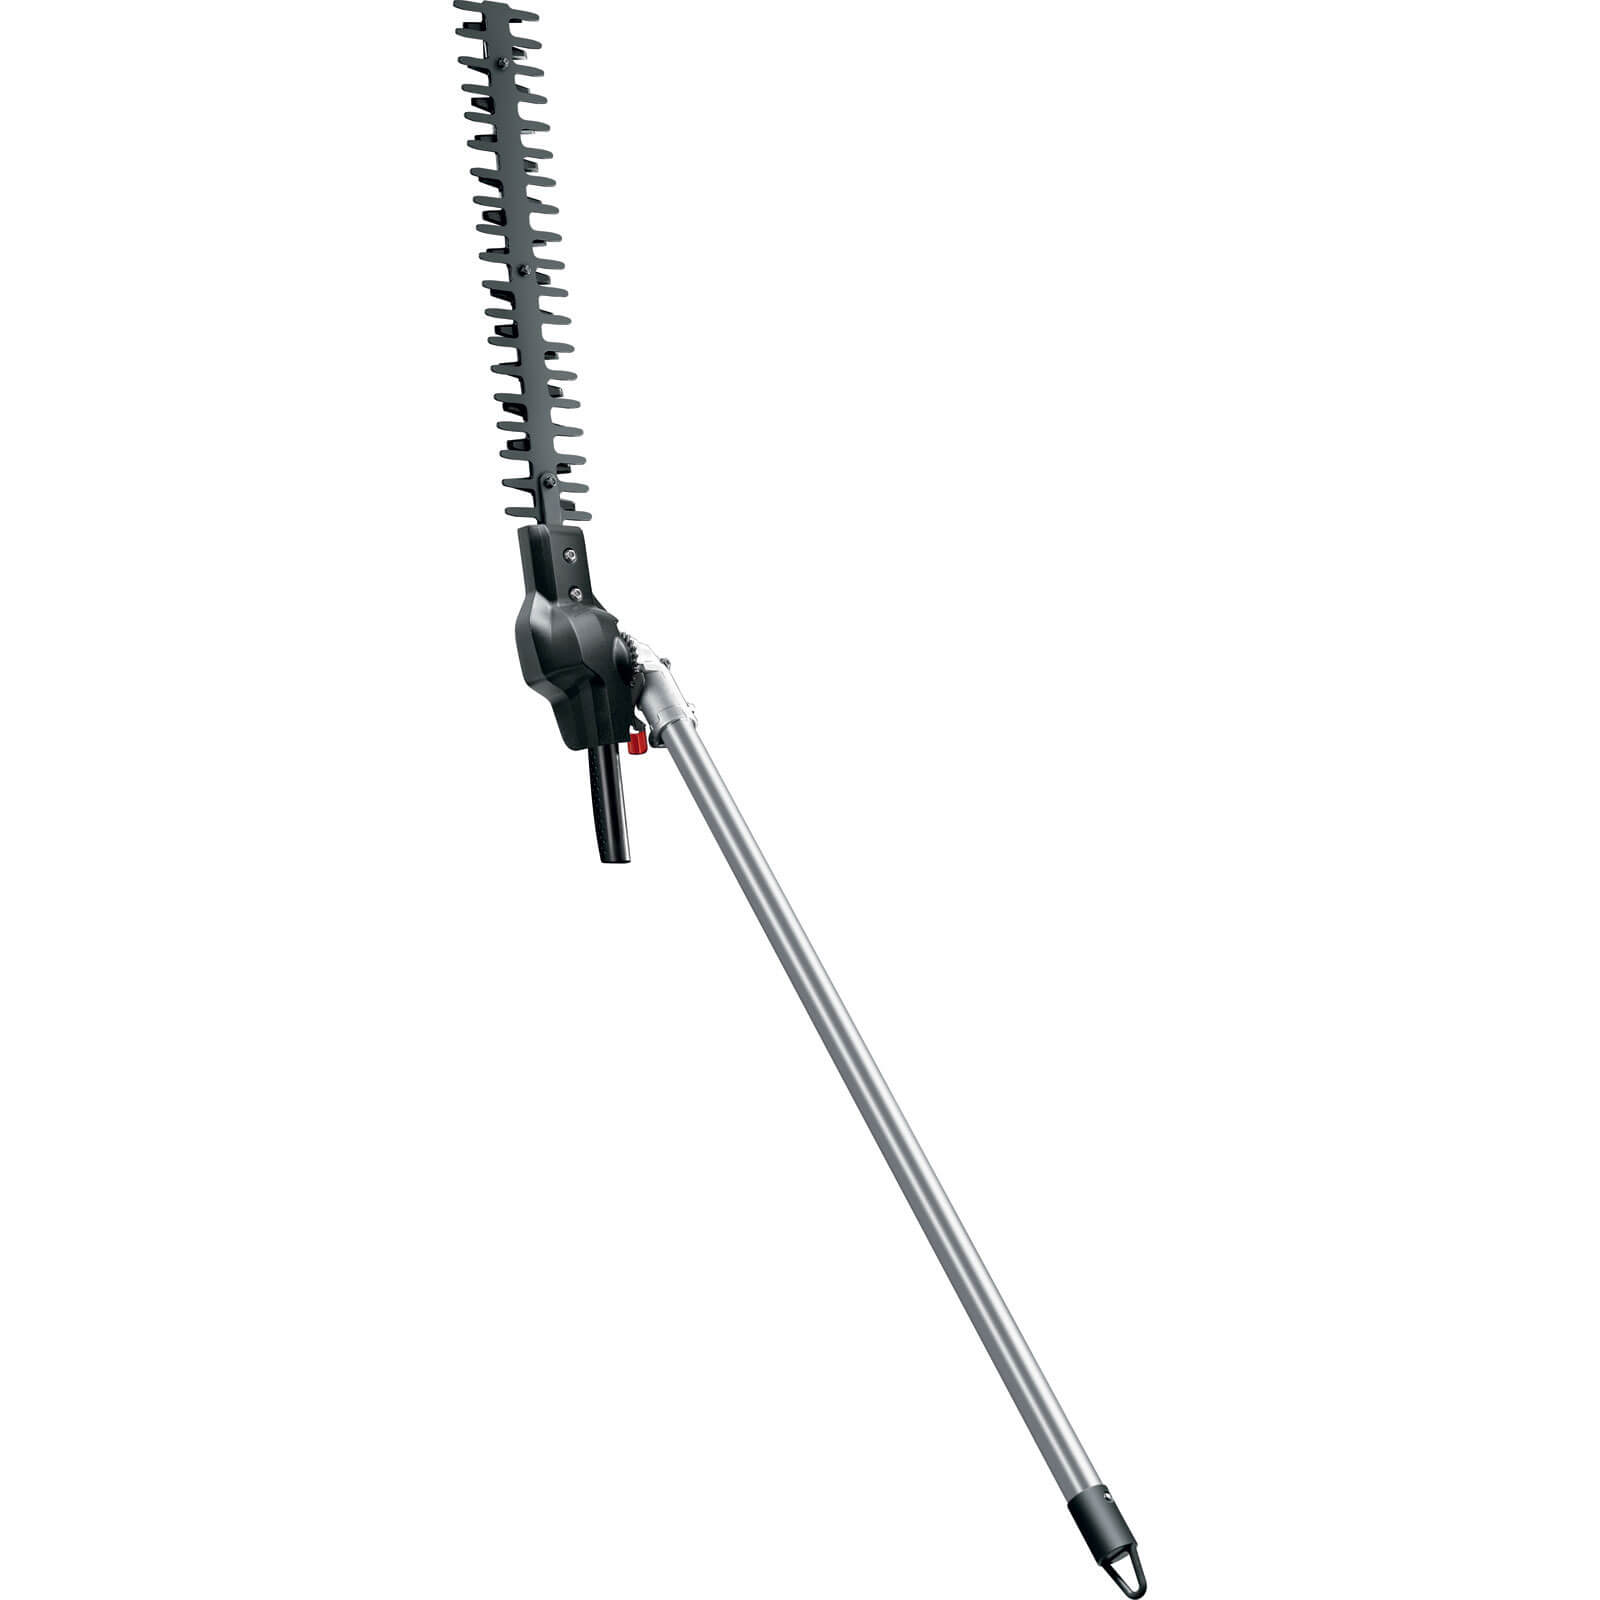 bosch multi tool hedge trimmer